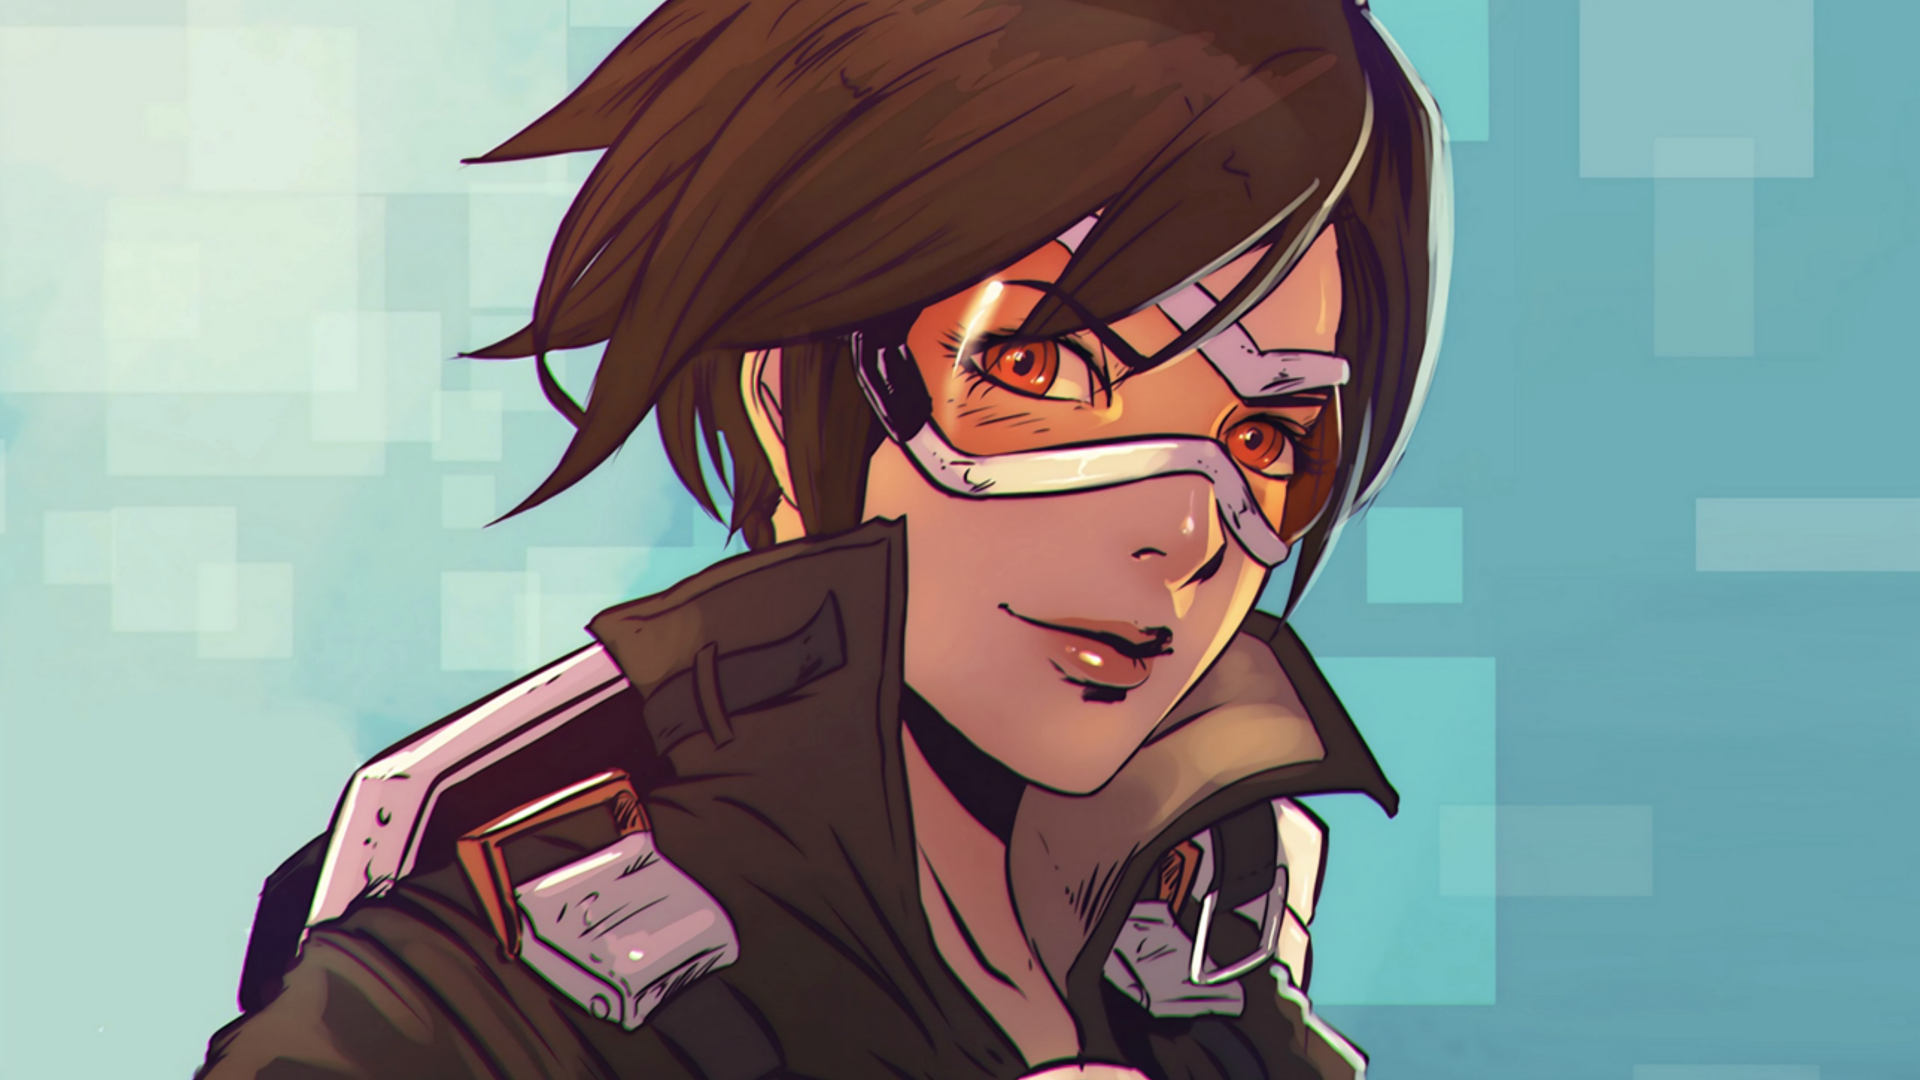 Anime 1920x1080 Overwatch Tracer (Overwatch) video game girls PC gaming DeviantArt video game characters goggles women fan art red eyes brunette shoulder length hair